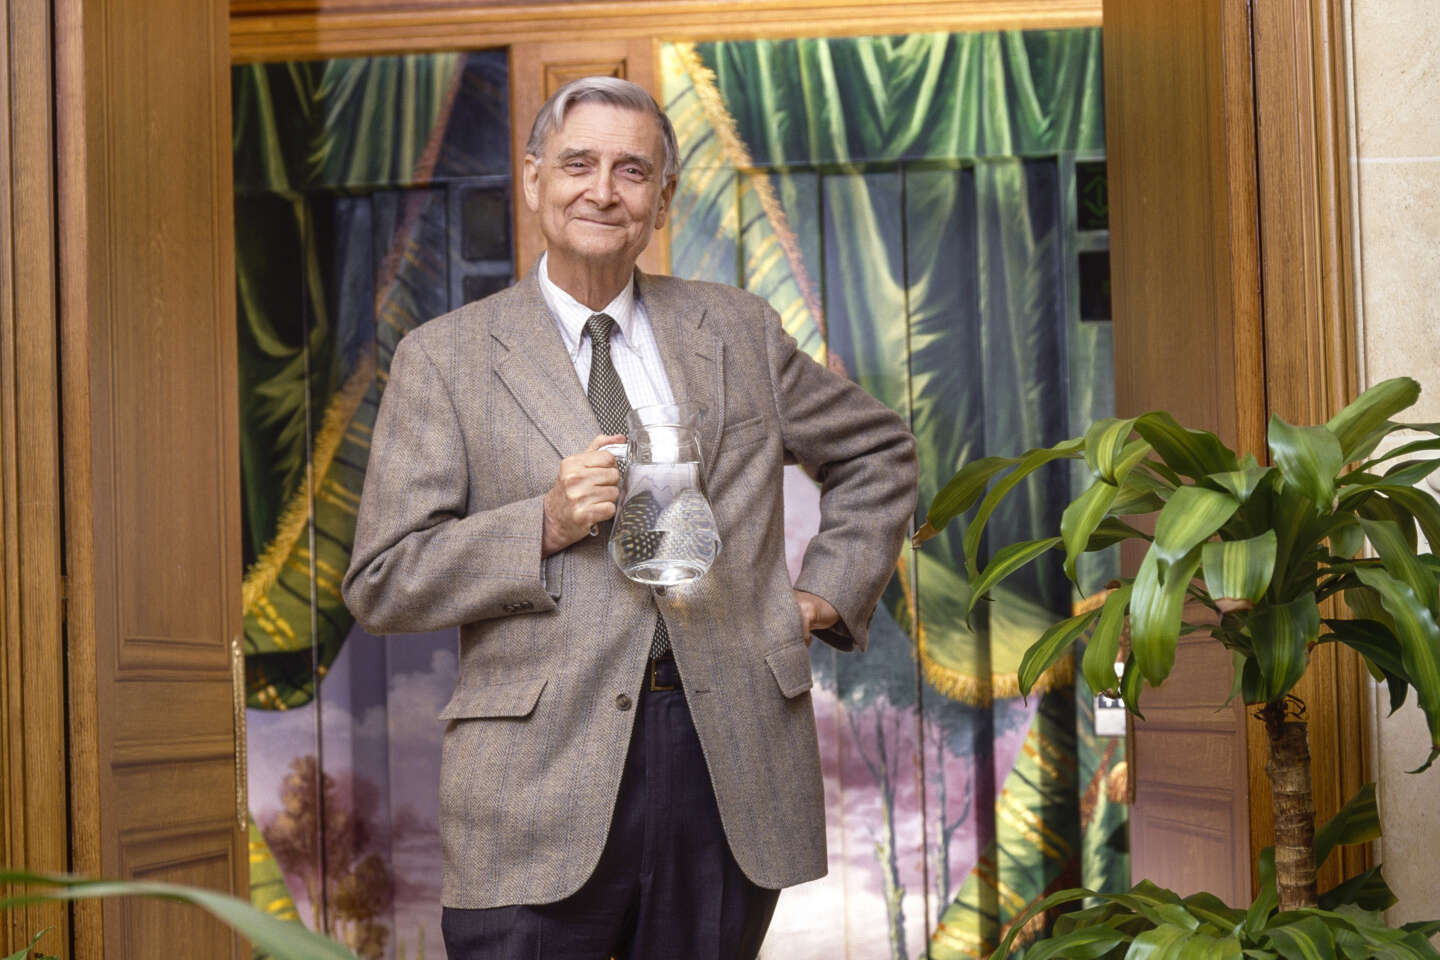 The shadow of racism over E. O. Wilson, the giant of biology